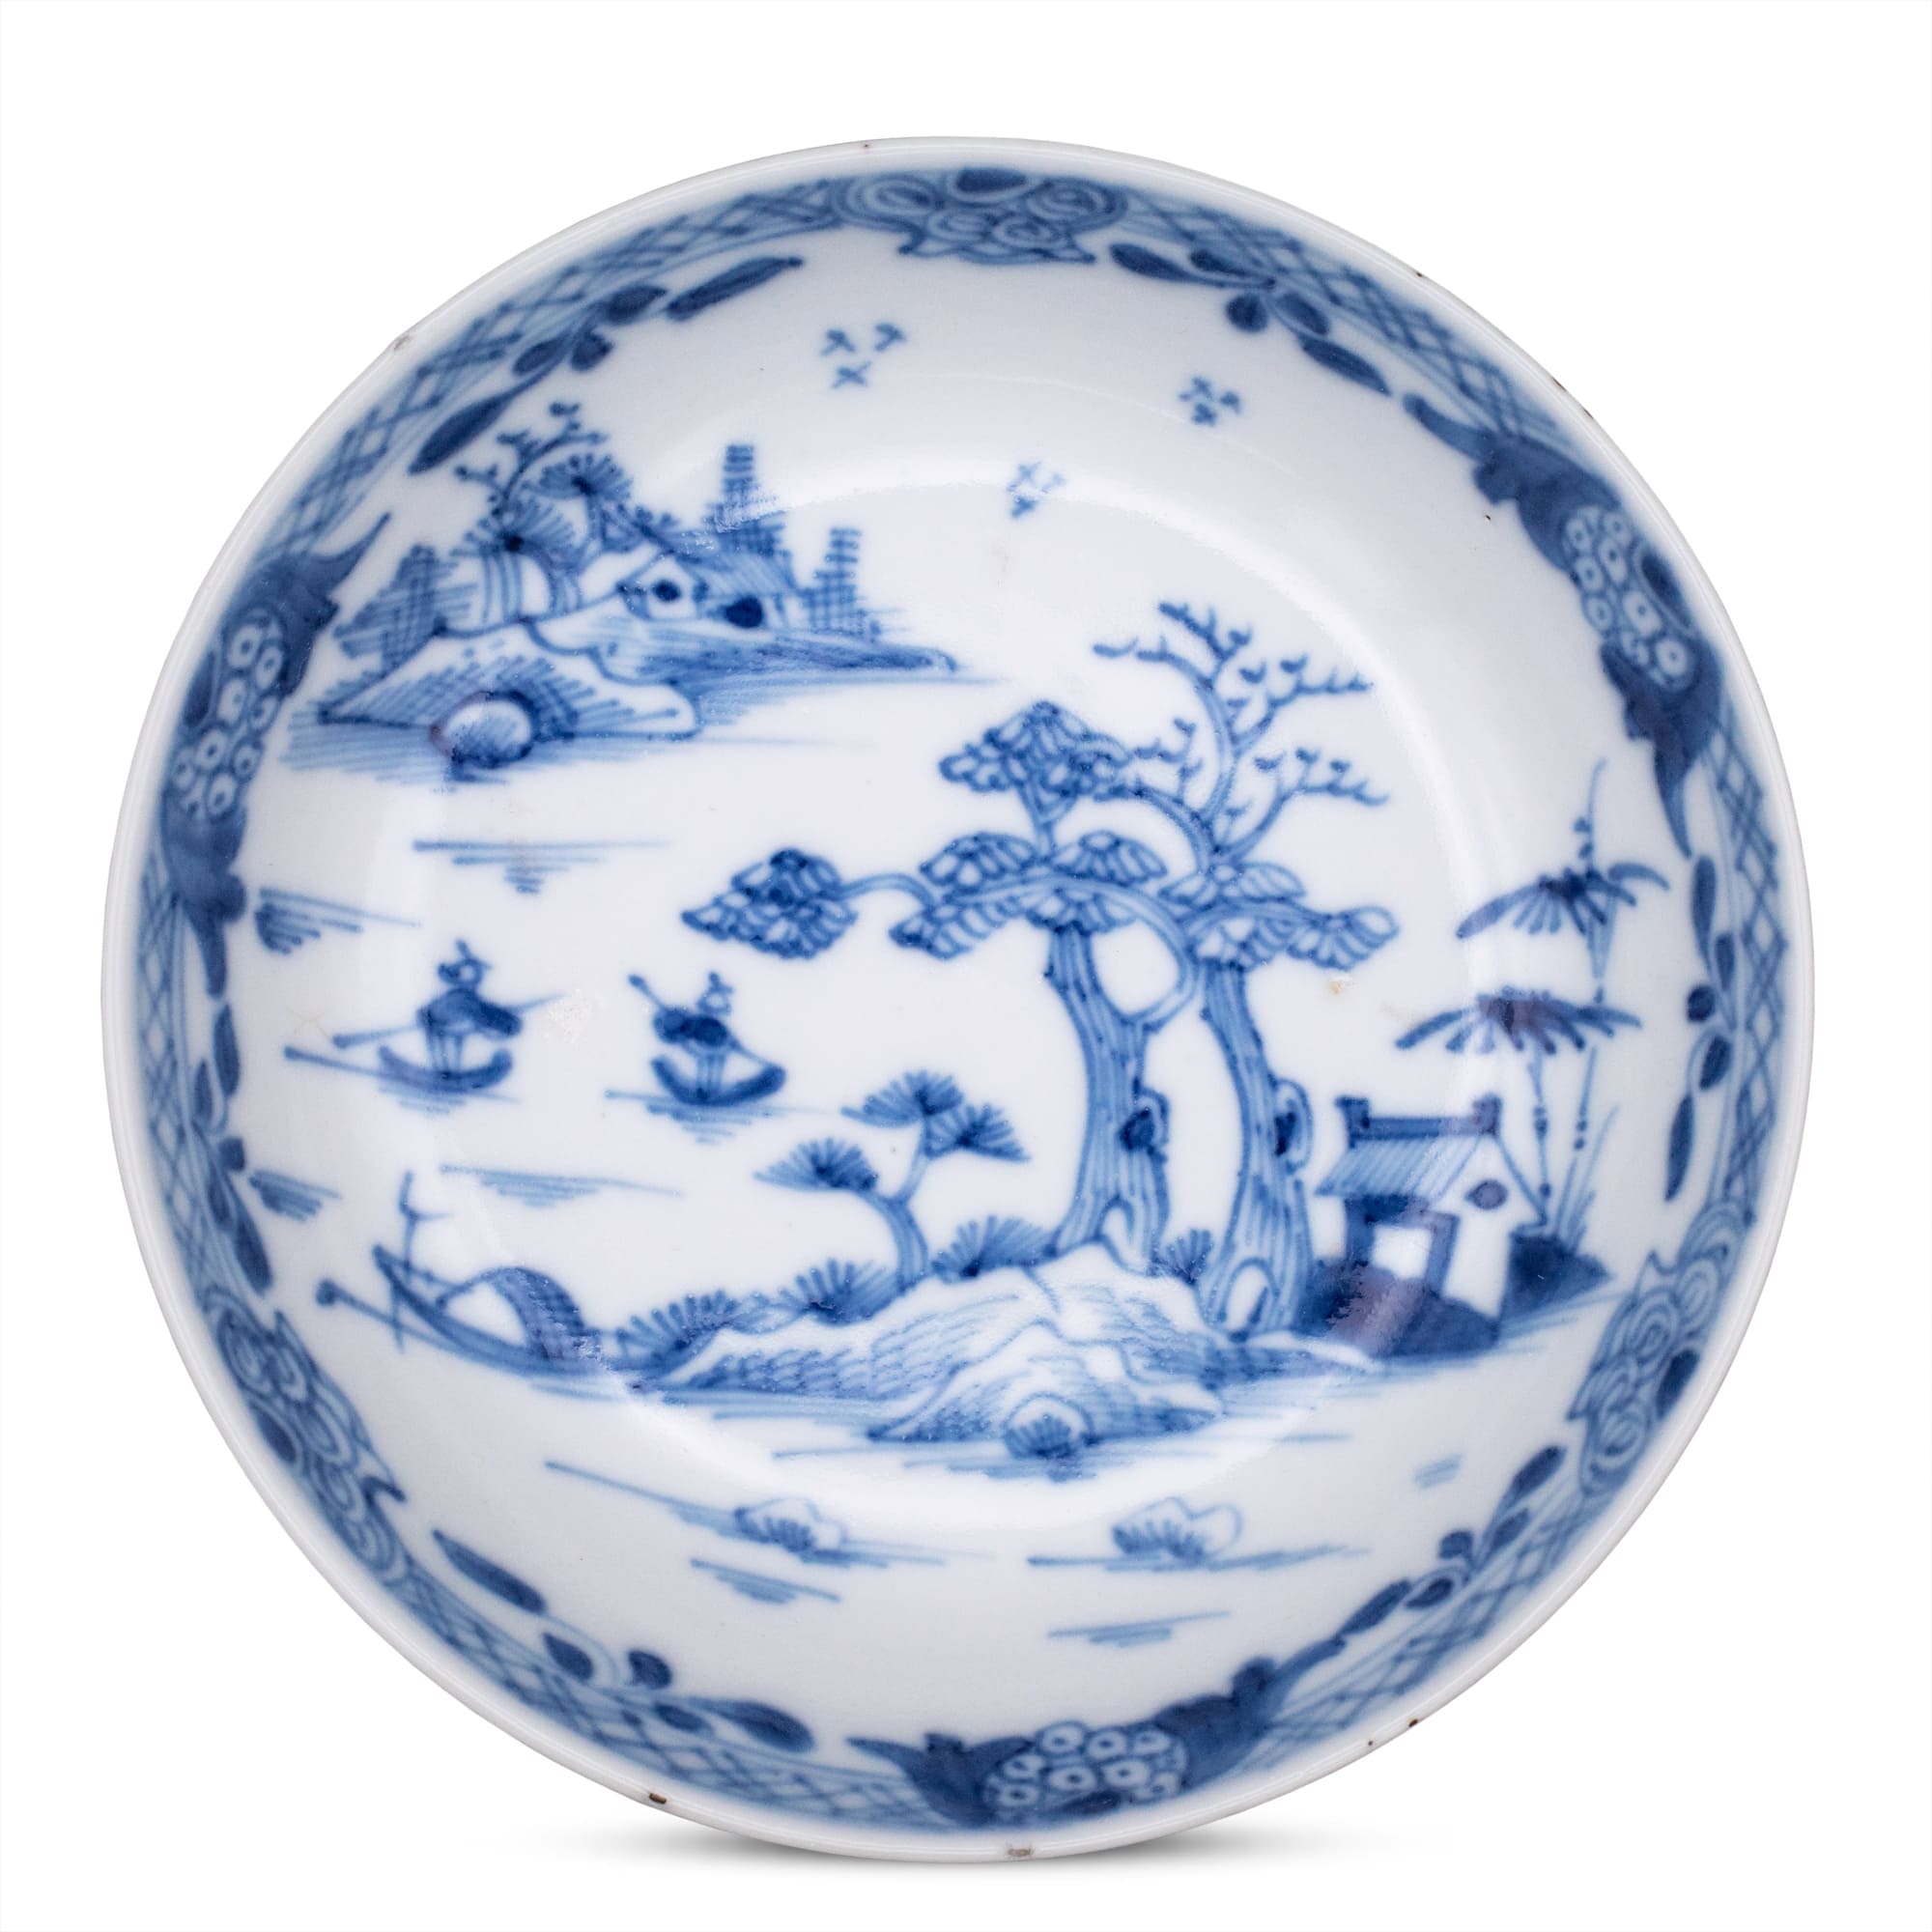 Antique Chinese 18th Century Export Porcelain Saucer With Landscape Painting